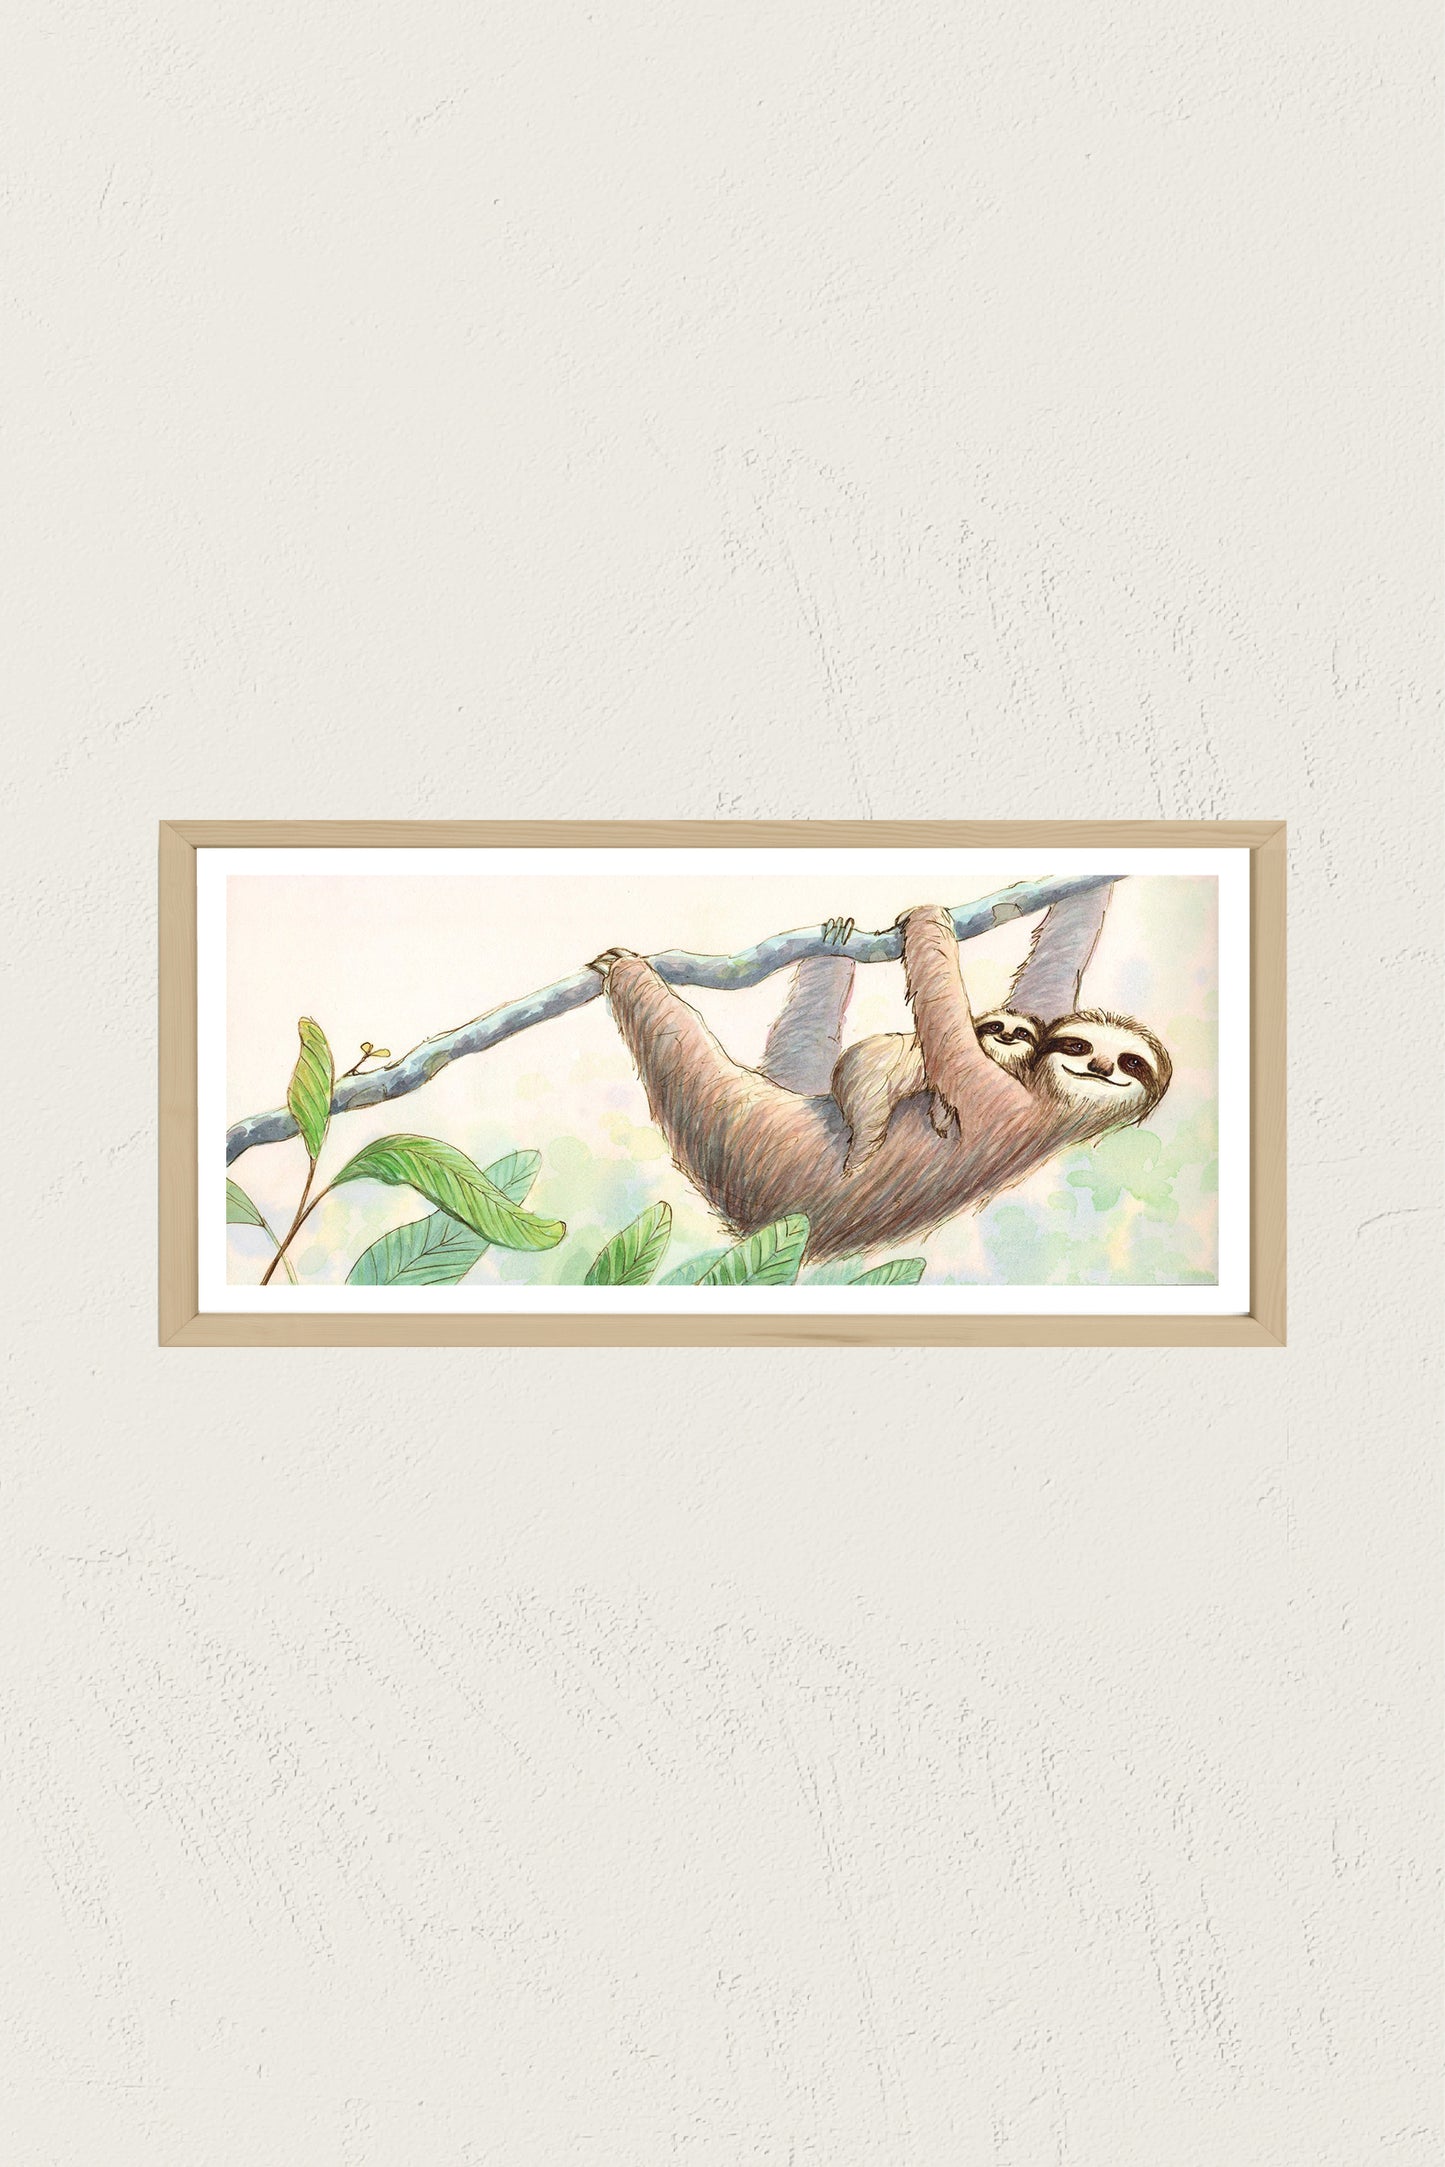 Sloth Mama and Baby Watercolor Painting Original Art "Laze in the Shade"